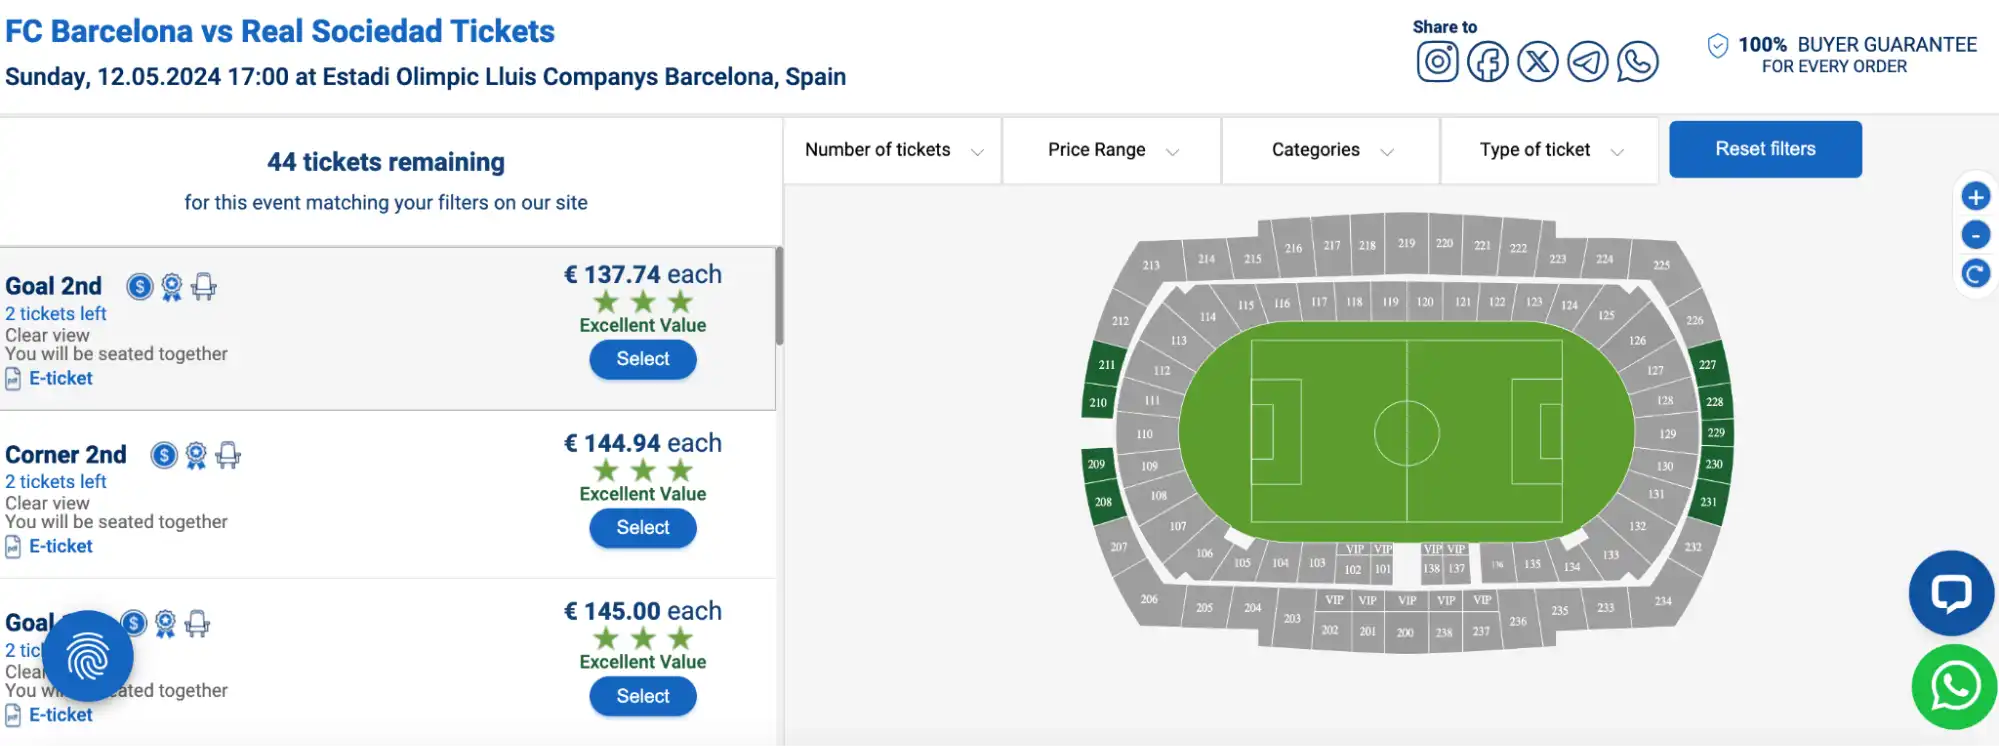 screenshot of FC Barcelona vs Real Sociedad tickets page with highligten Goal 2nd seats